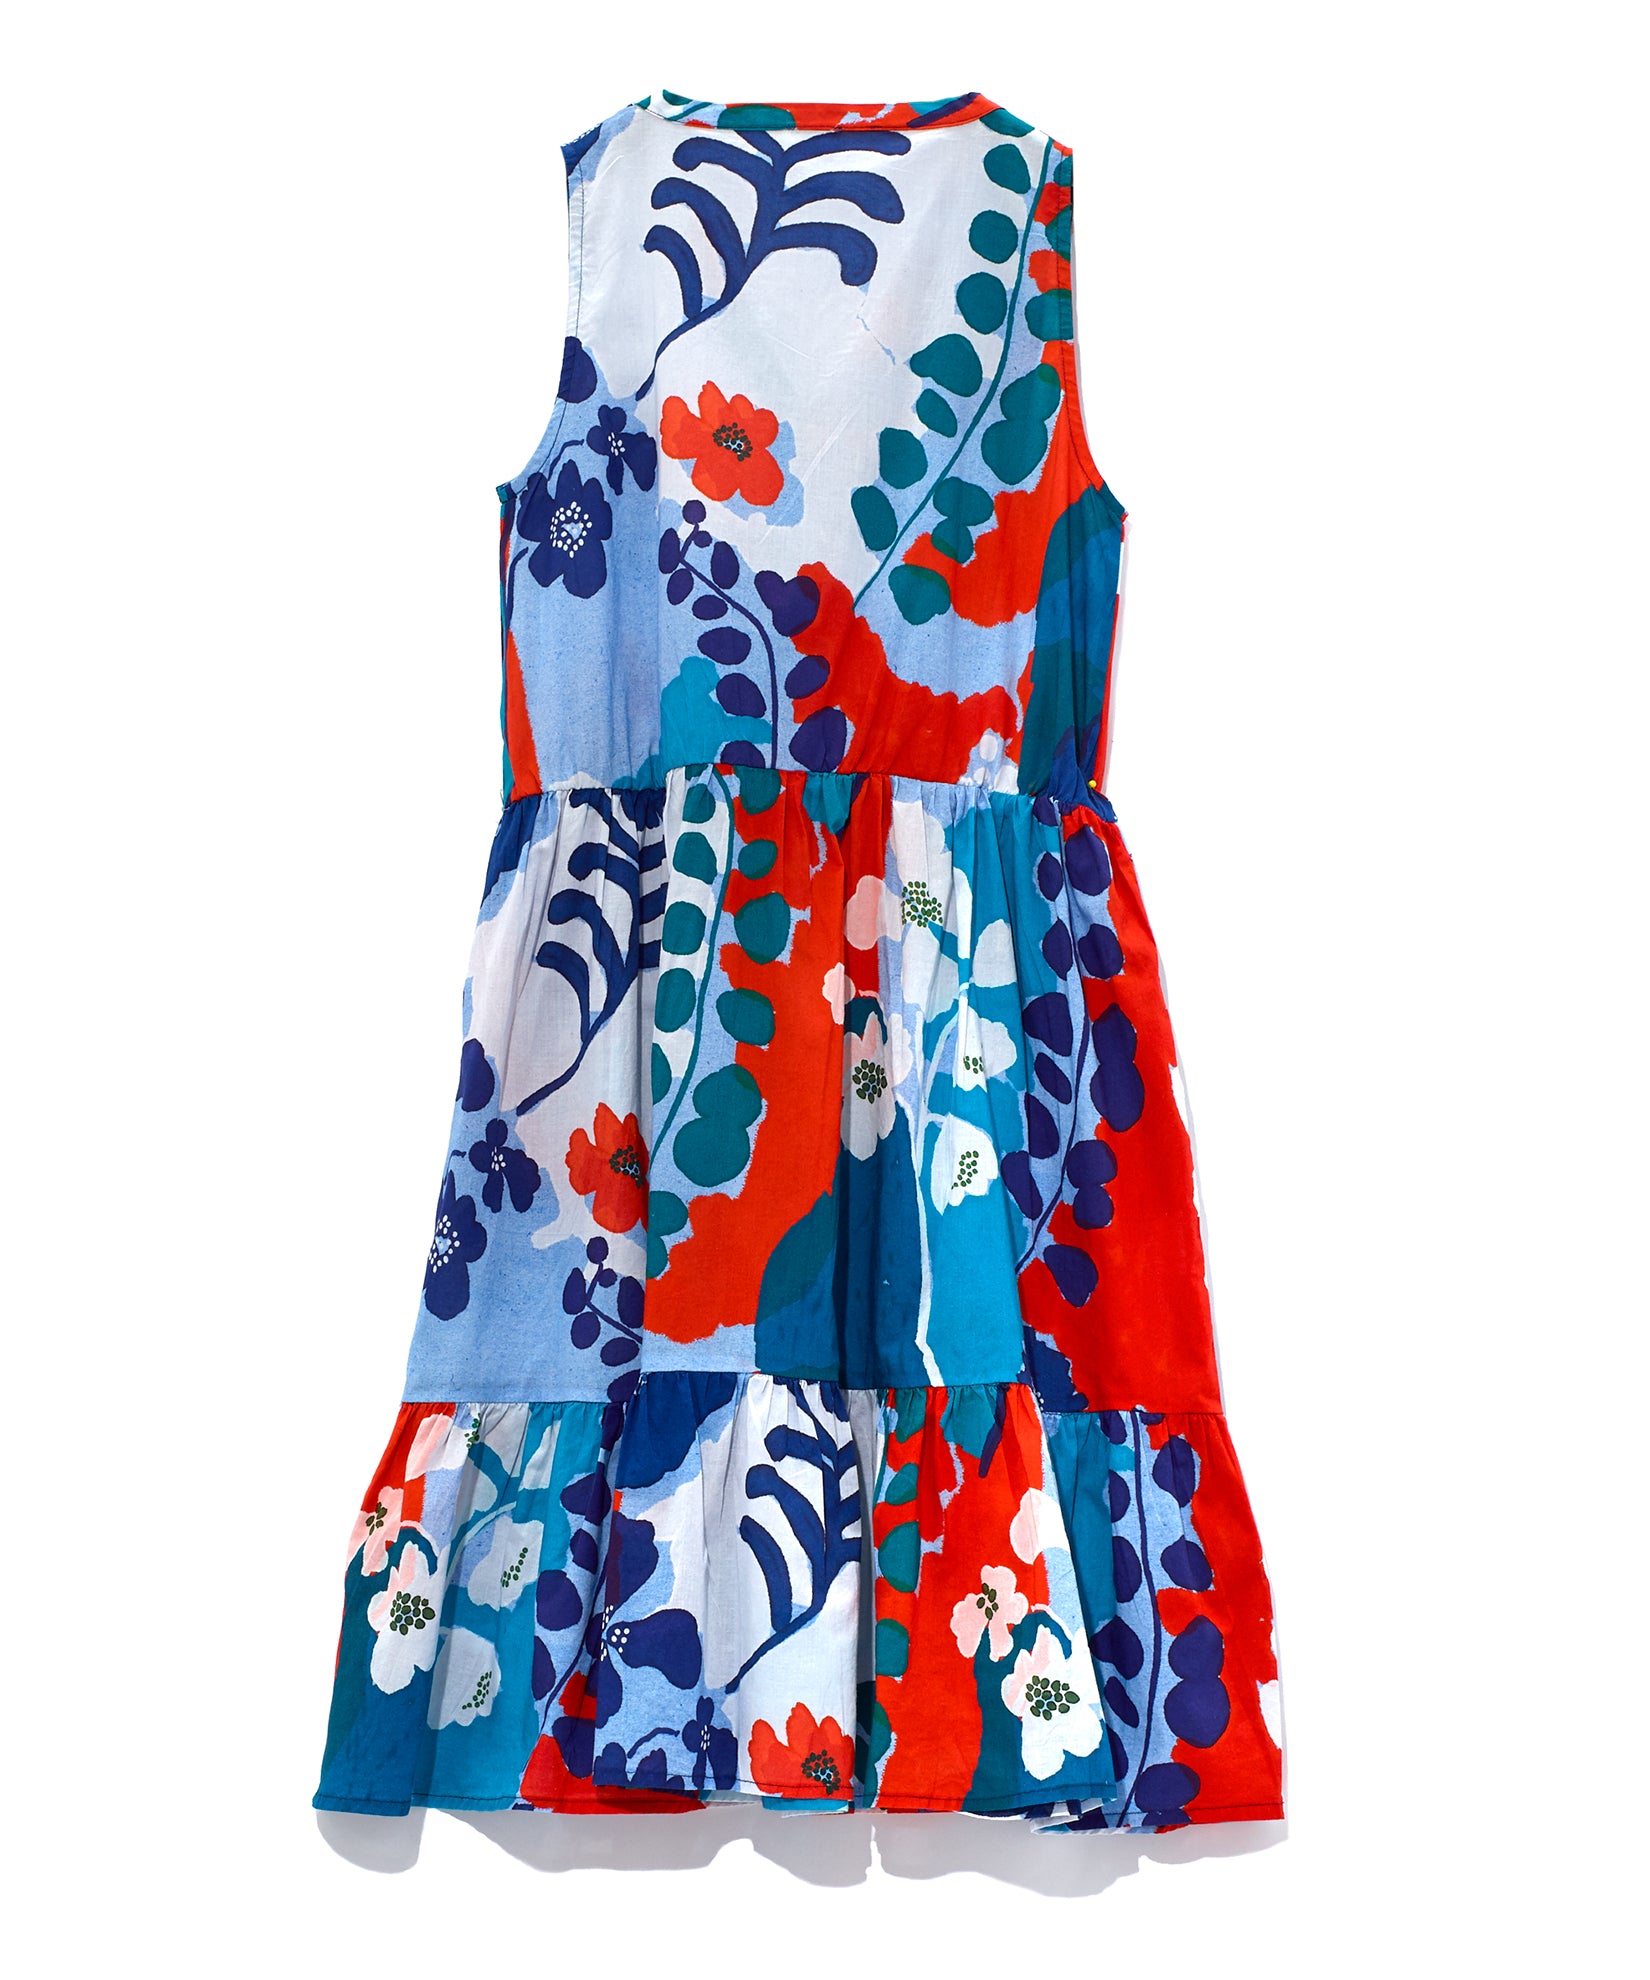 Wild Floral Tiered Sun Dress in color Atlantis